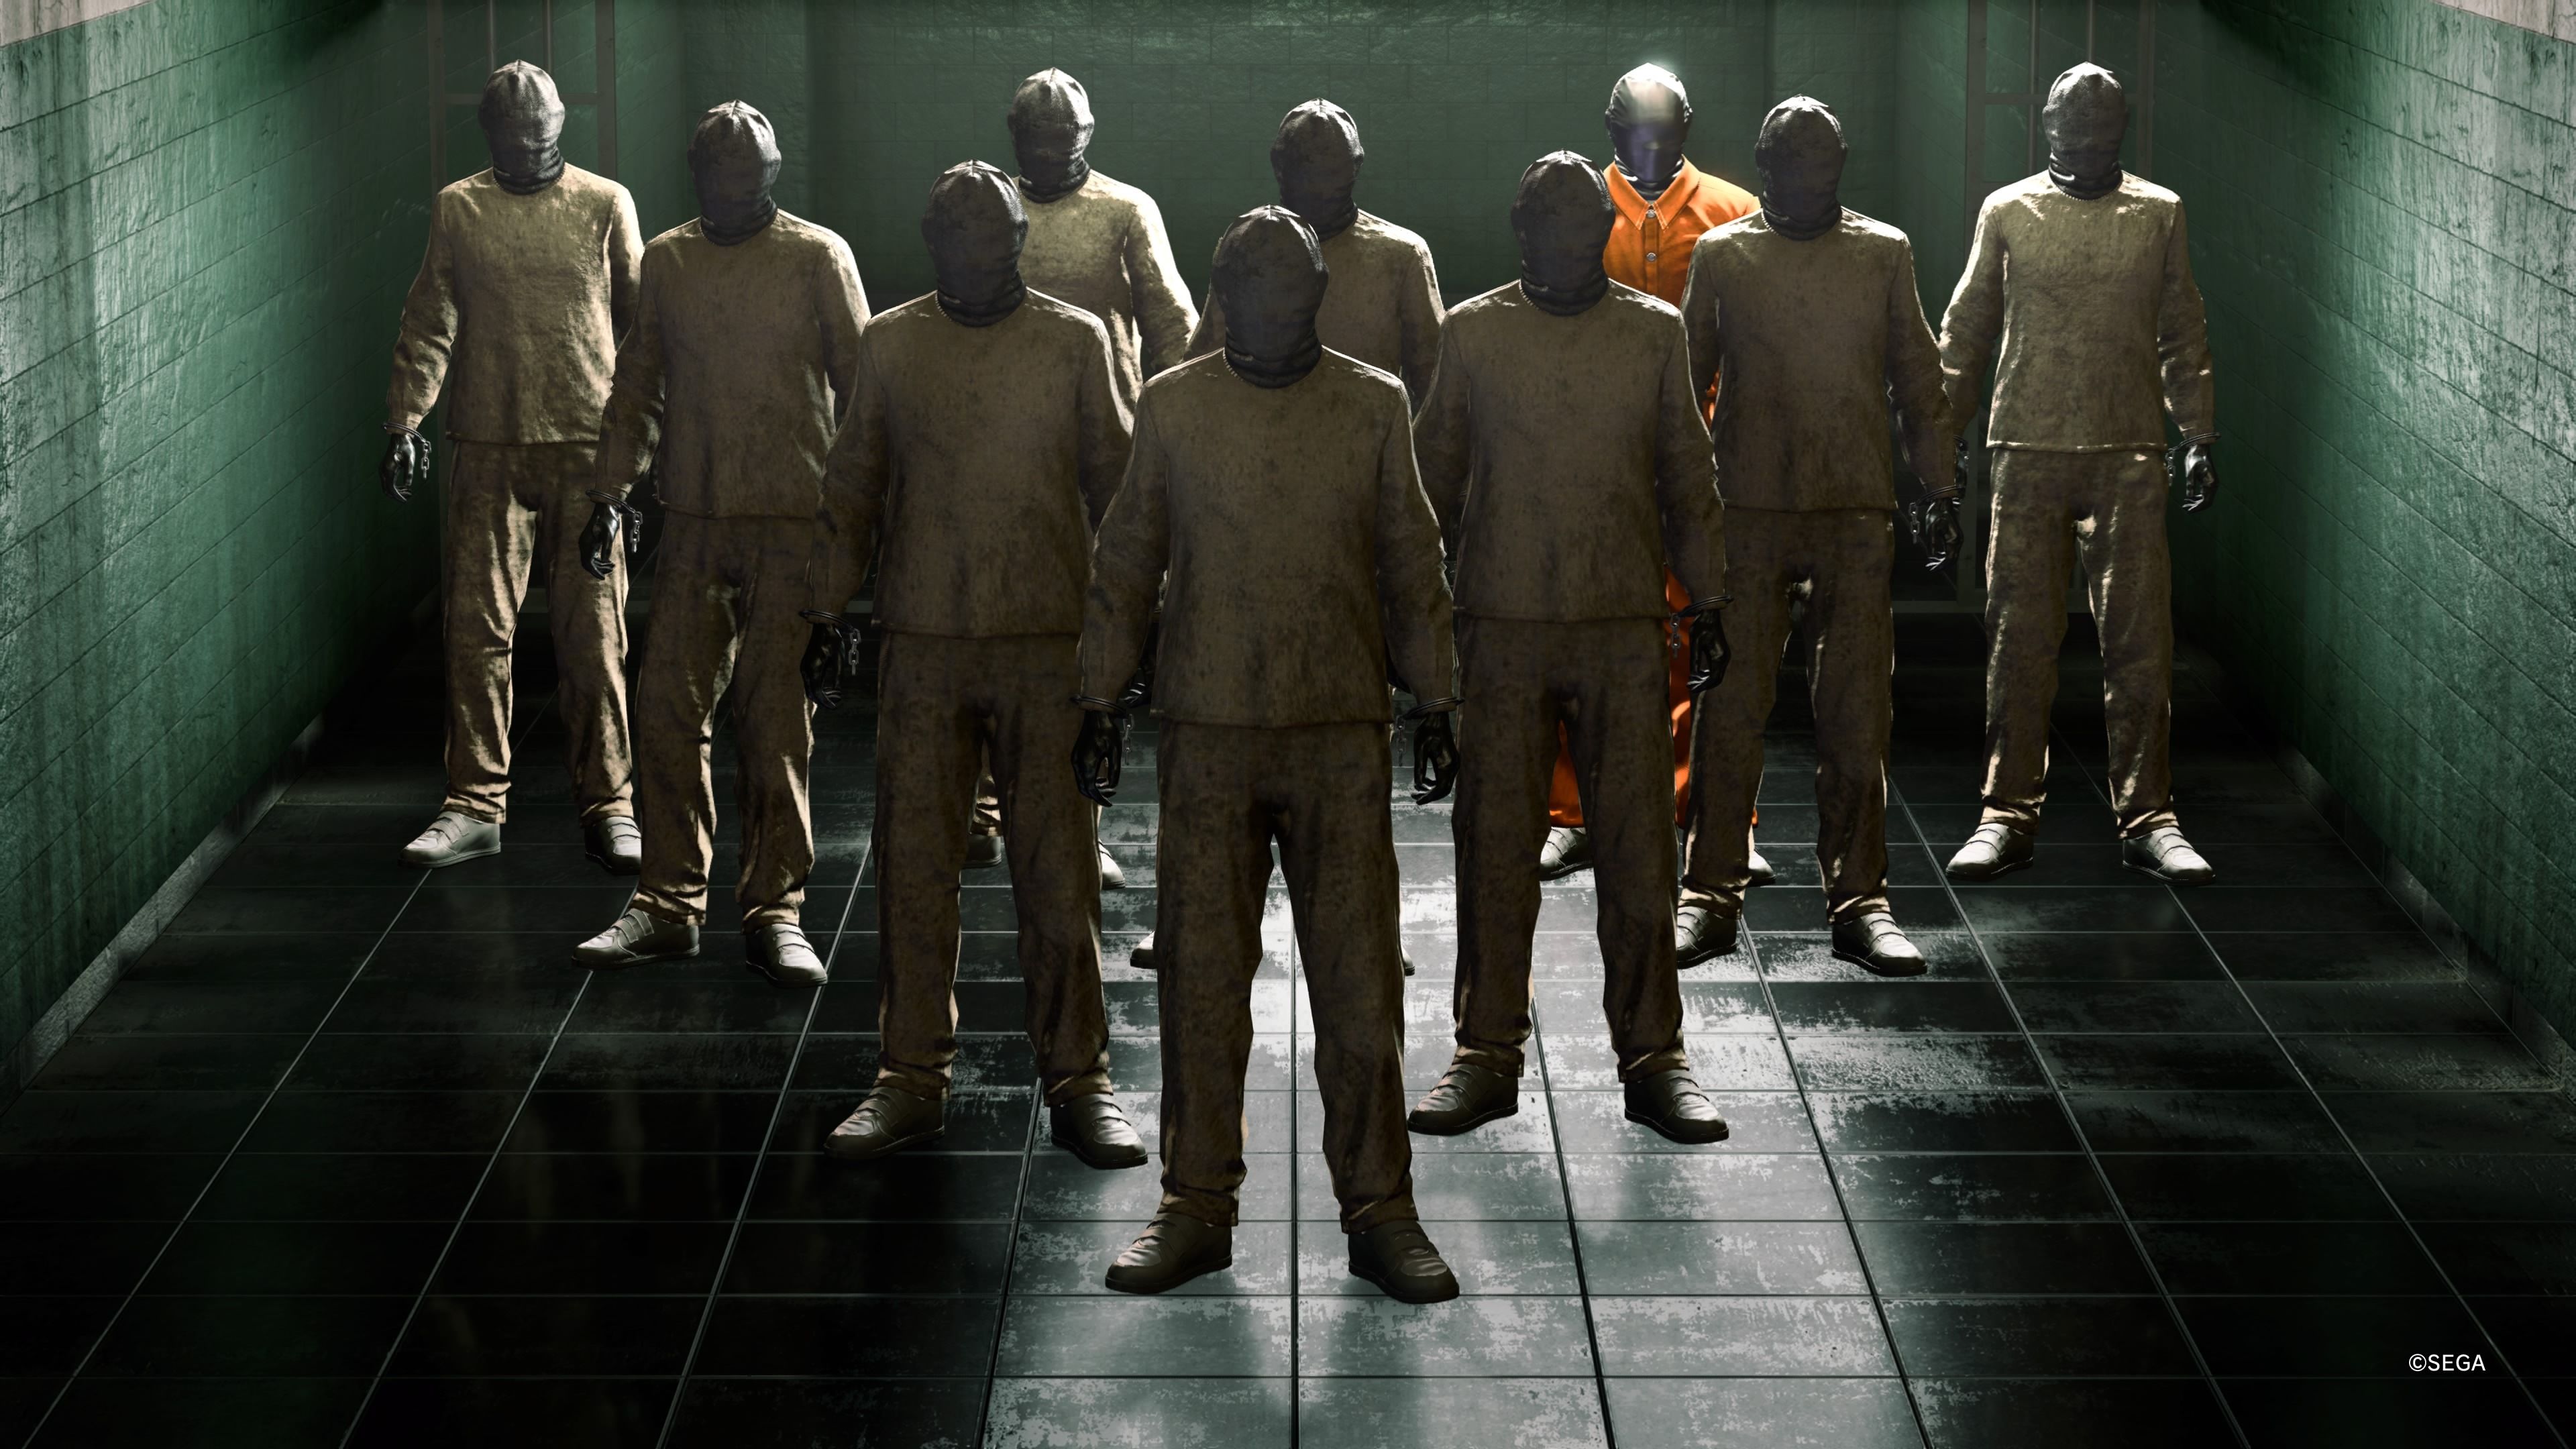 Rows of prisoners dressed in the same uniform with masks on. A man in the back has an orange jumpsuit 